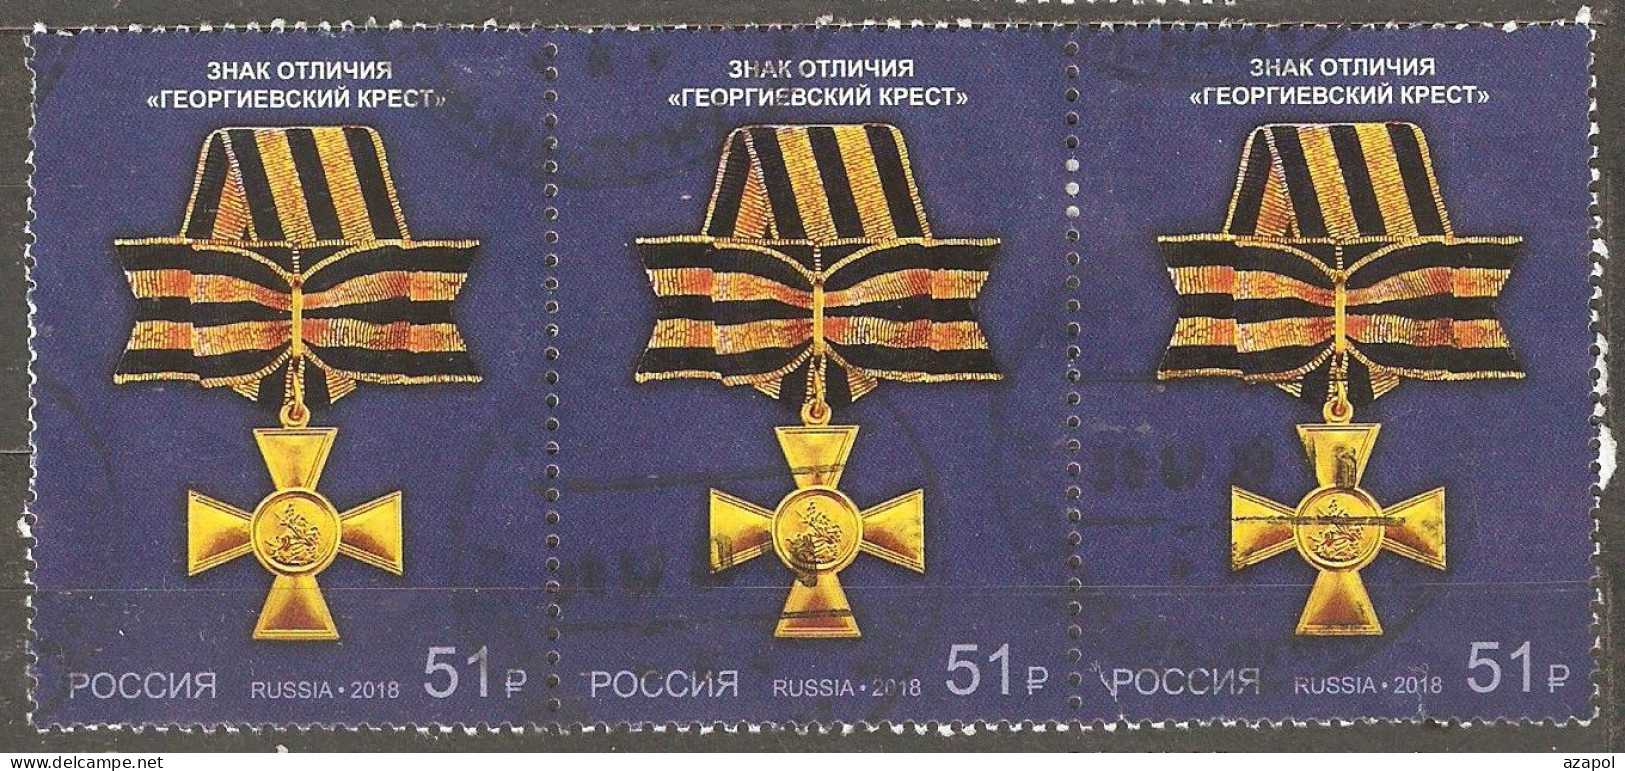 Russia: 1 Used Stamp Of A Set In Strip Of 3, State Awards Of Russian Federation - St. George's Cross, 2018, Mi#2647 - Usados